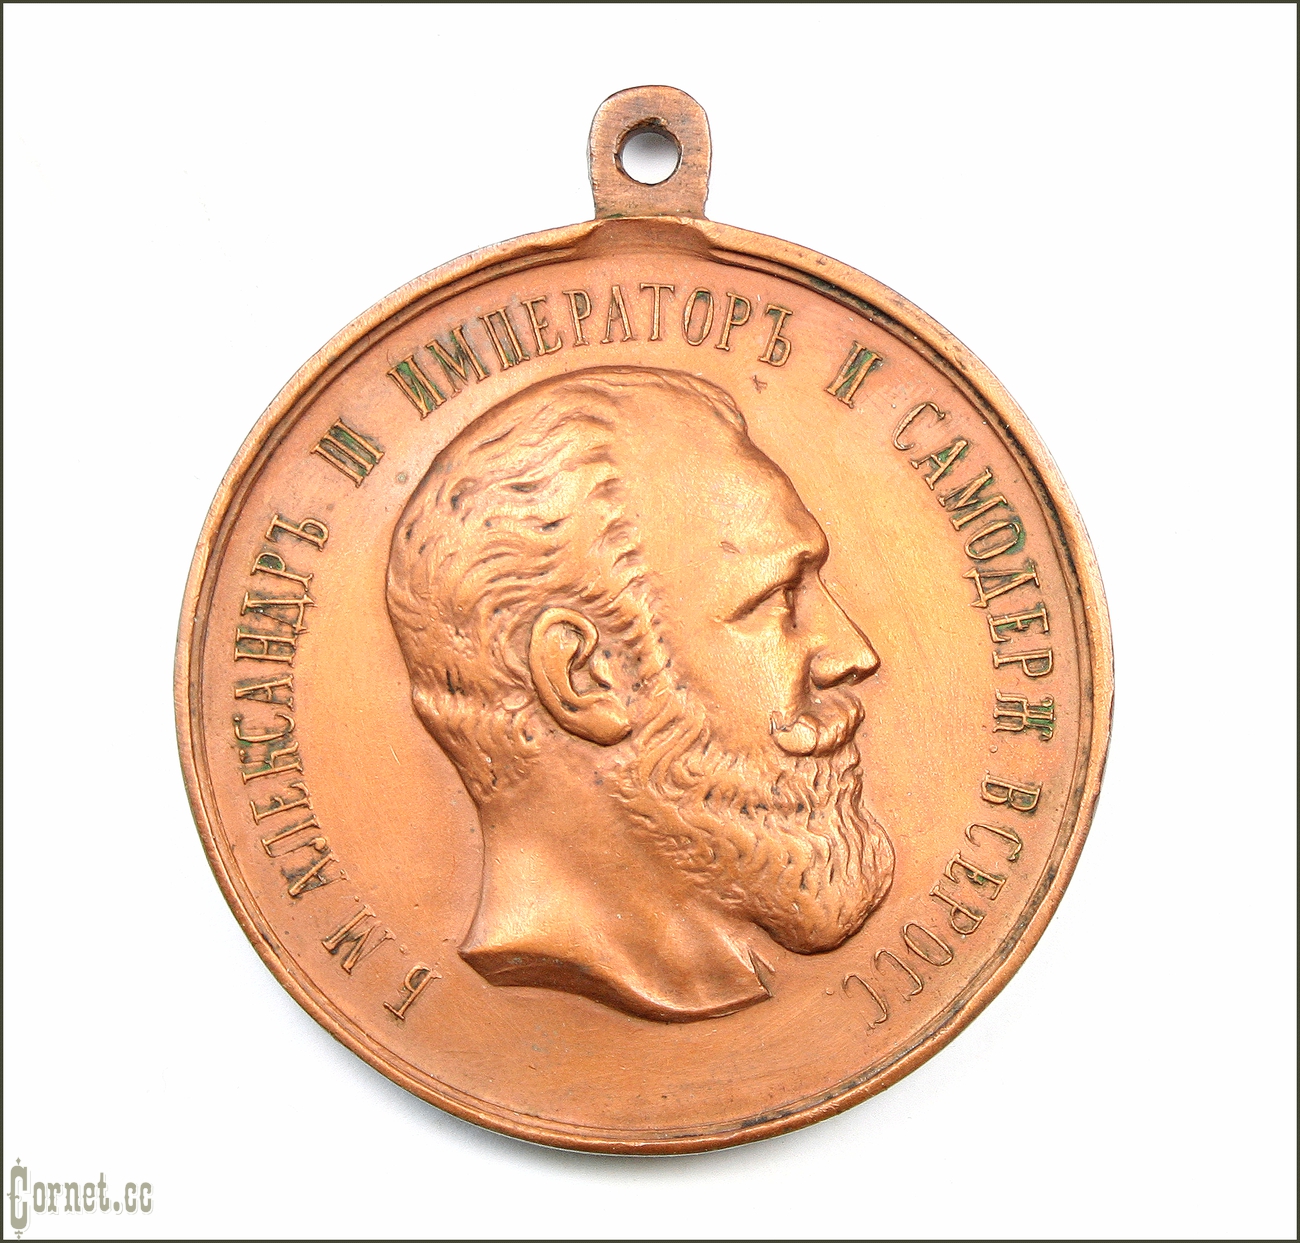 The neck medal "For Zeal" AIII